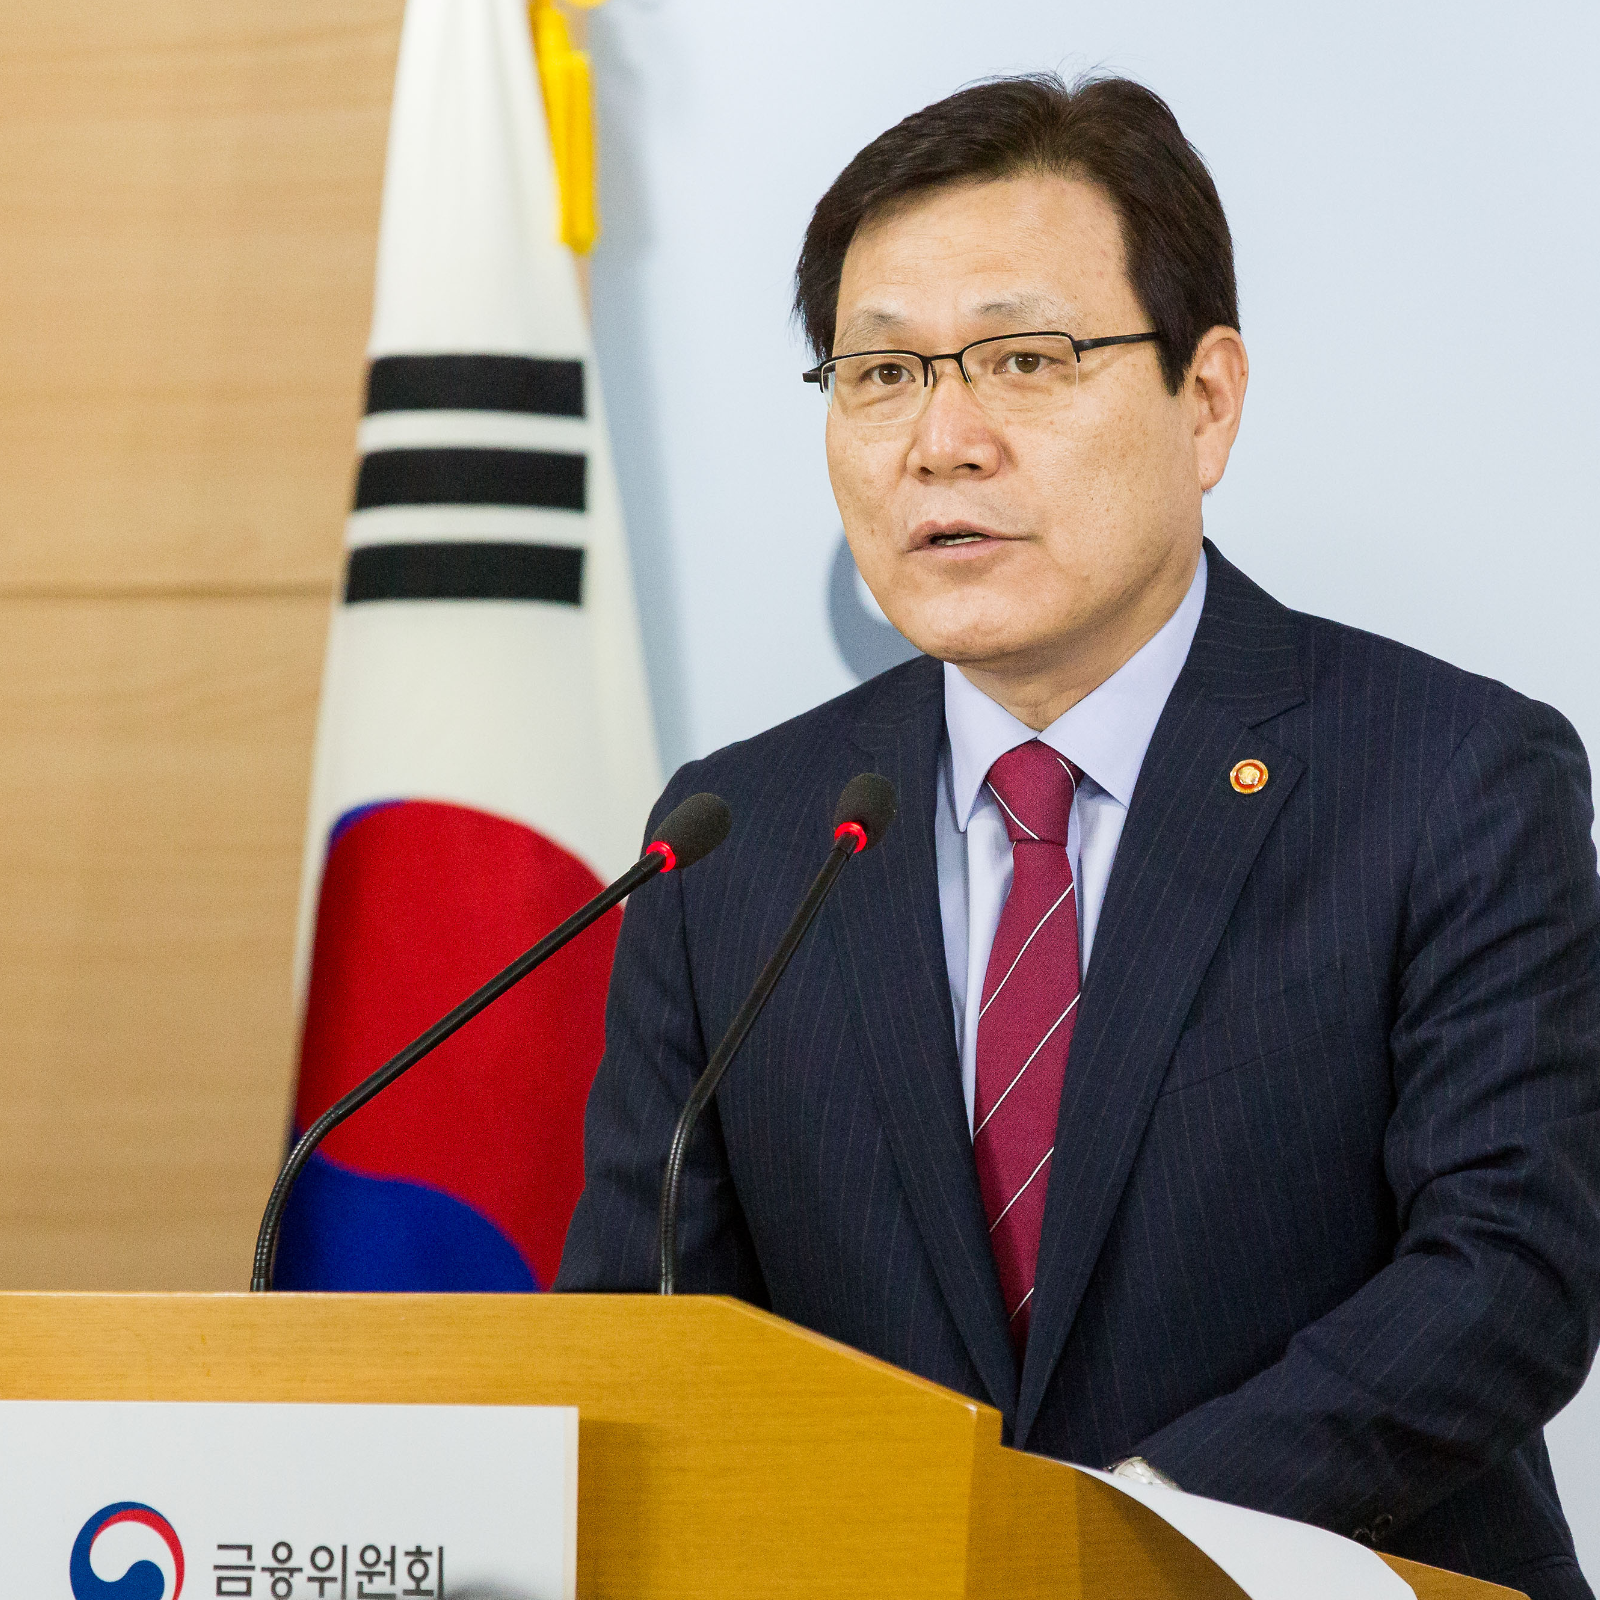 South Korea Clarifies Position After Reports of Possible Ban on All Crypto Transactions